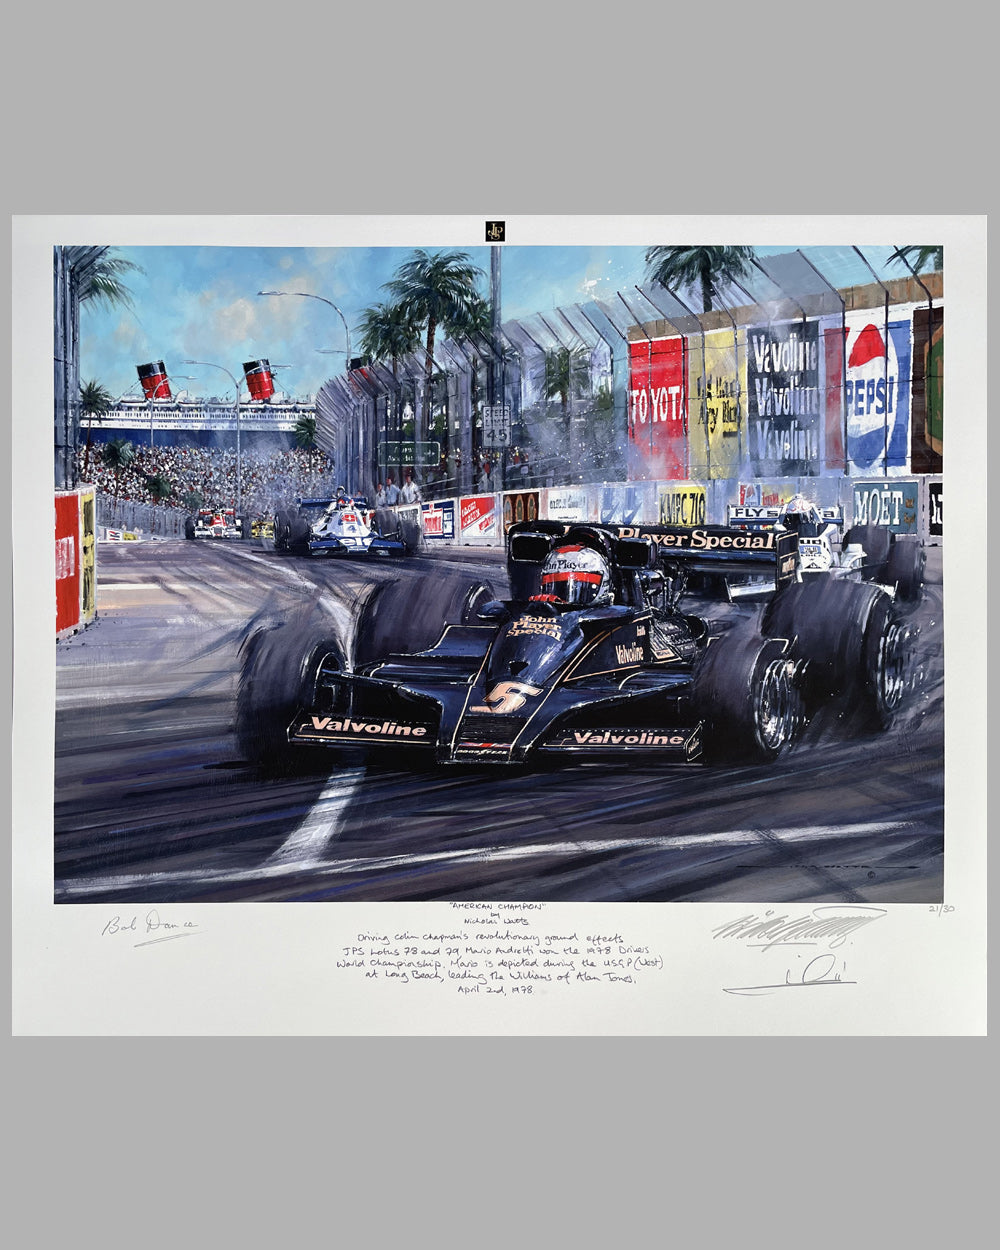 American Champion giclée by Nicholas Watts, hand autographed by Andretti